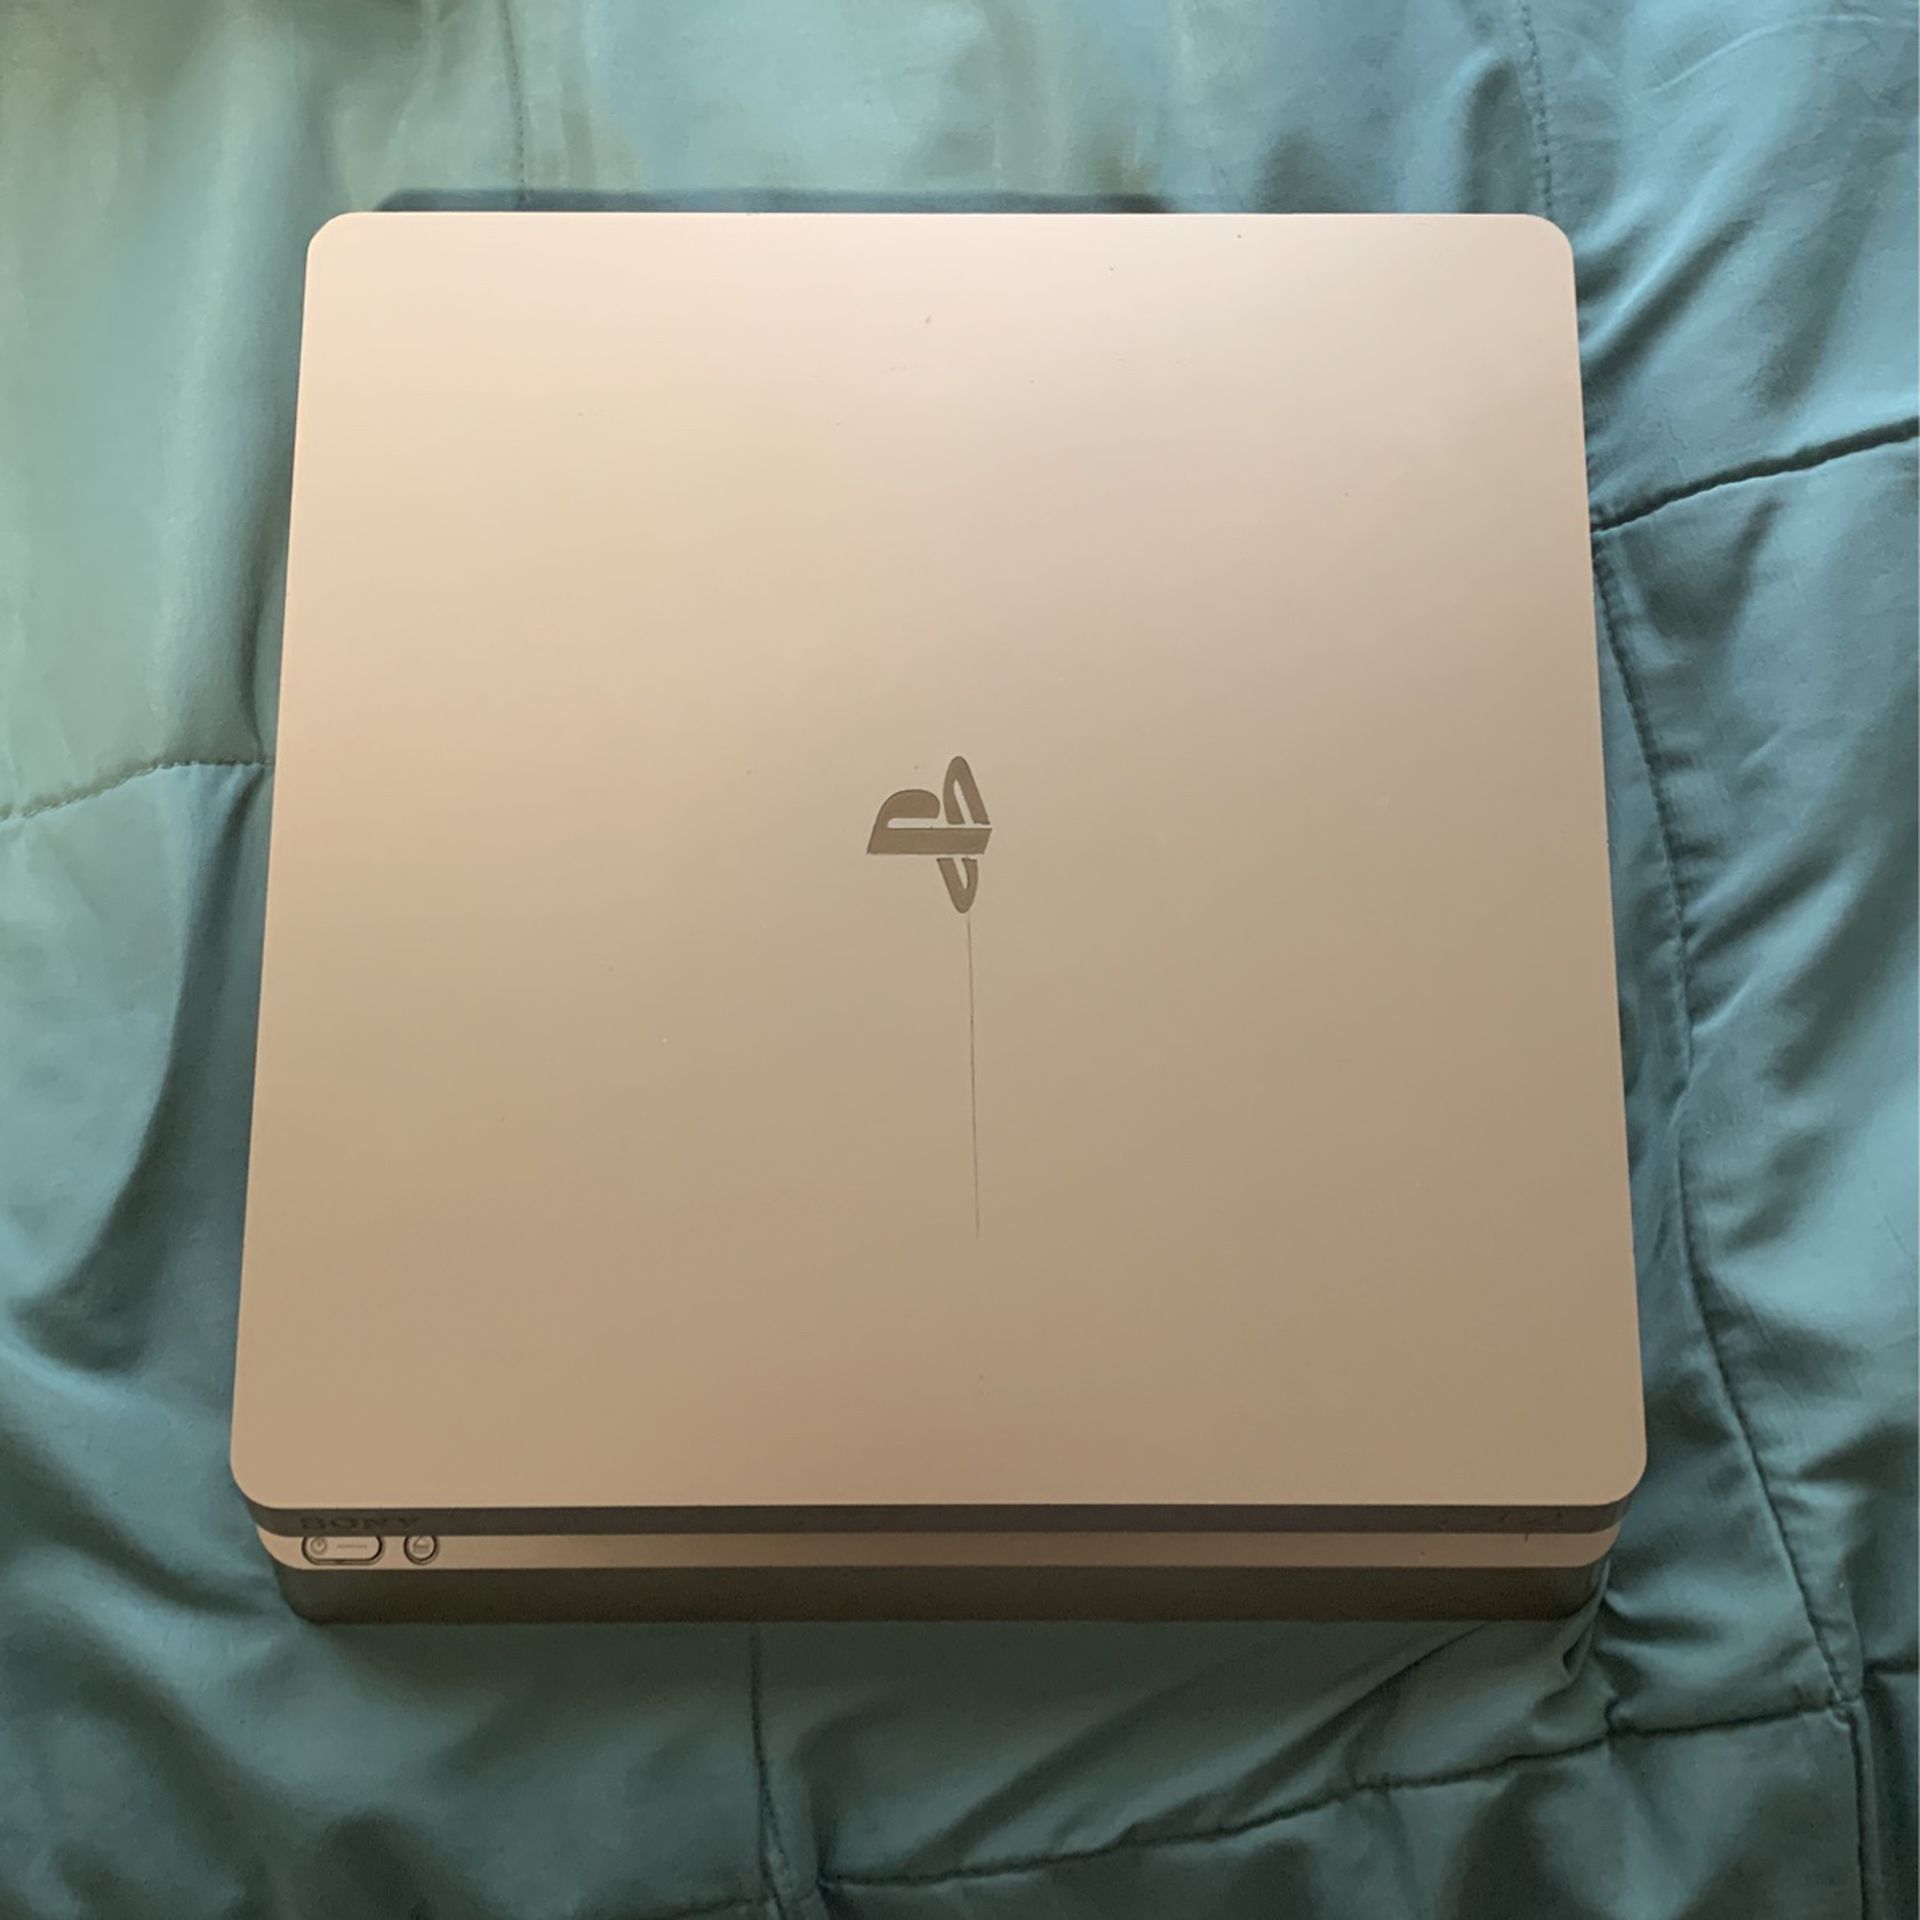 Gold PS4